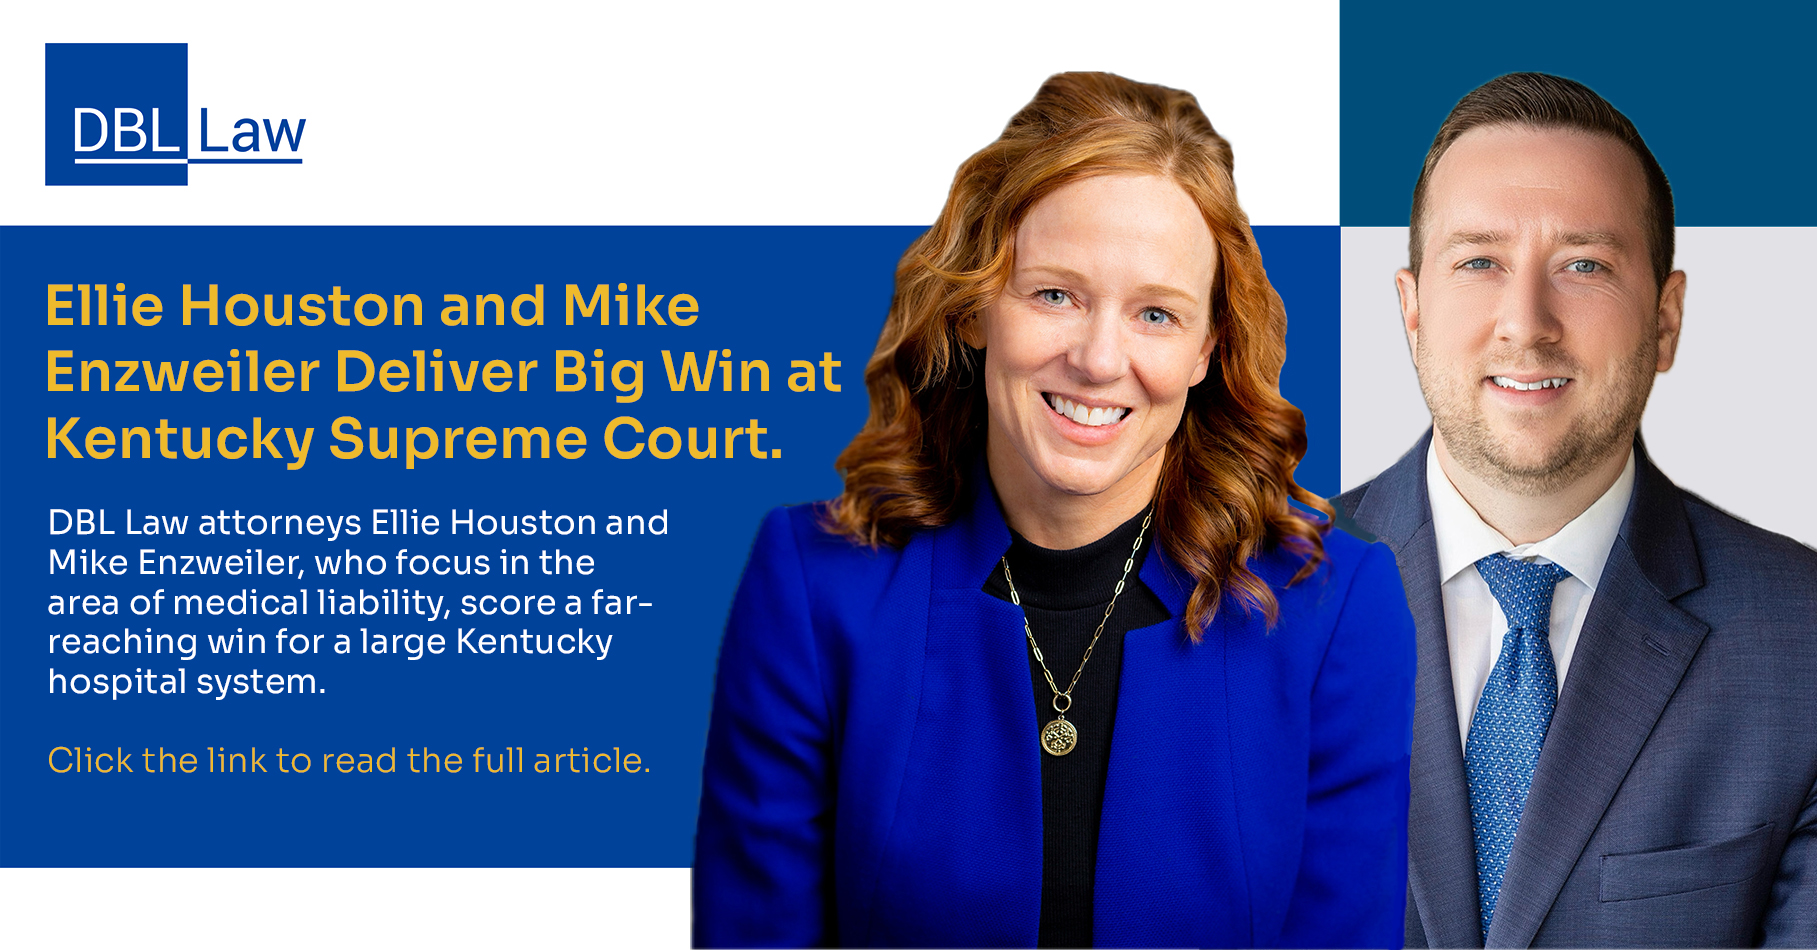 Ellie Houston and Mike Enzweiler Deliver Big Win at Kentucky Supreme Court